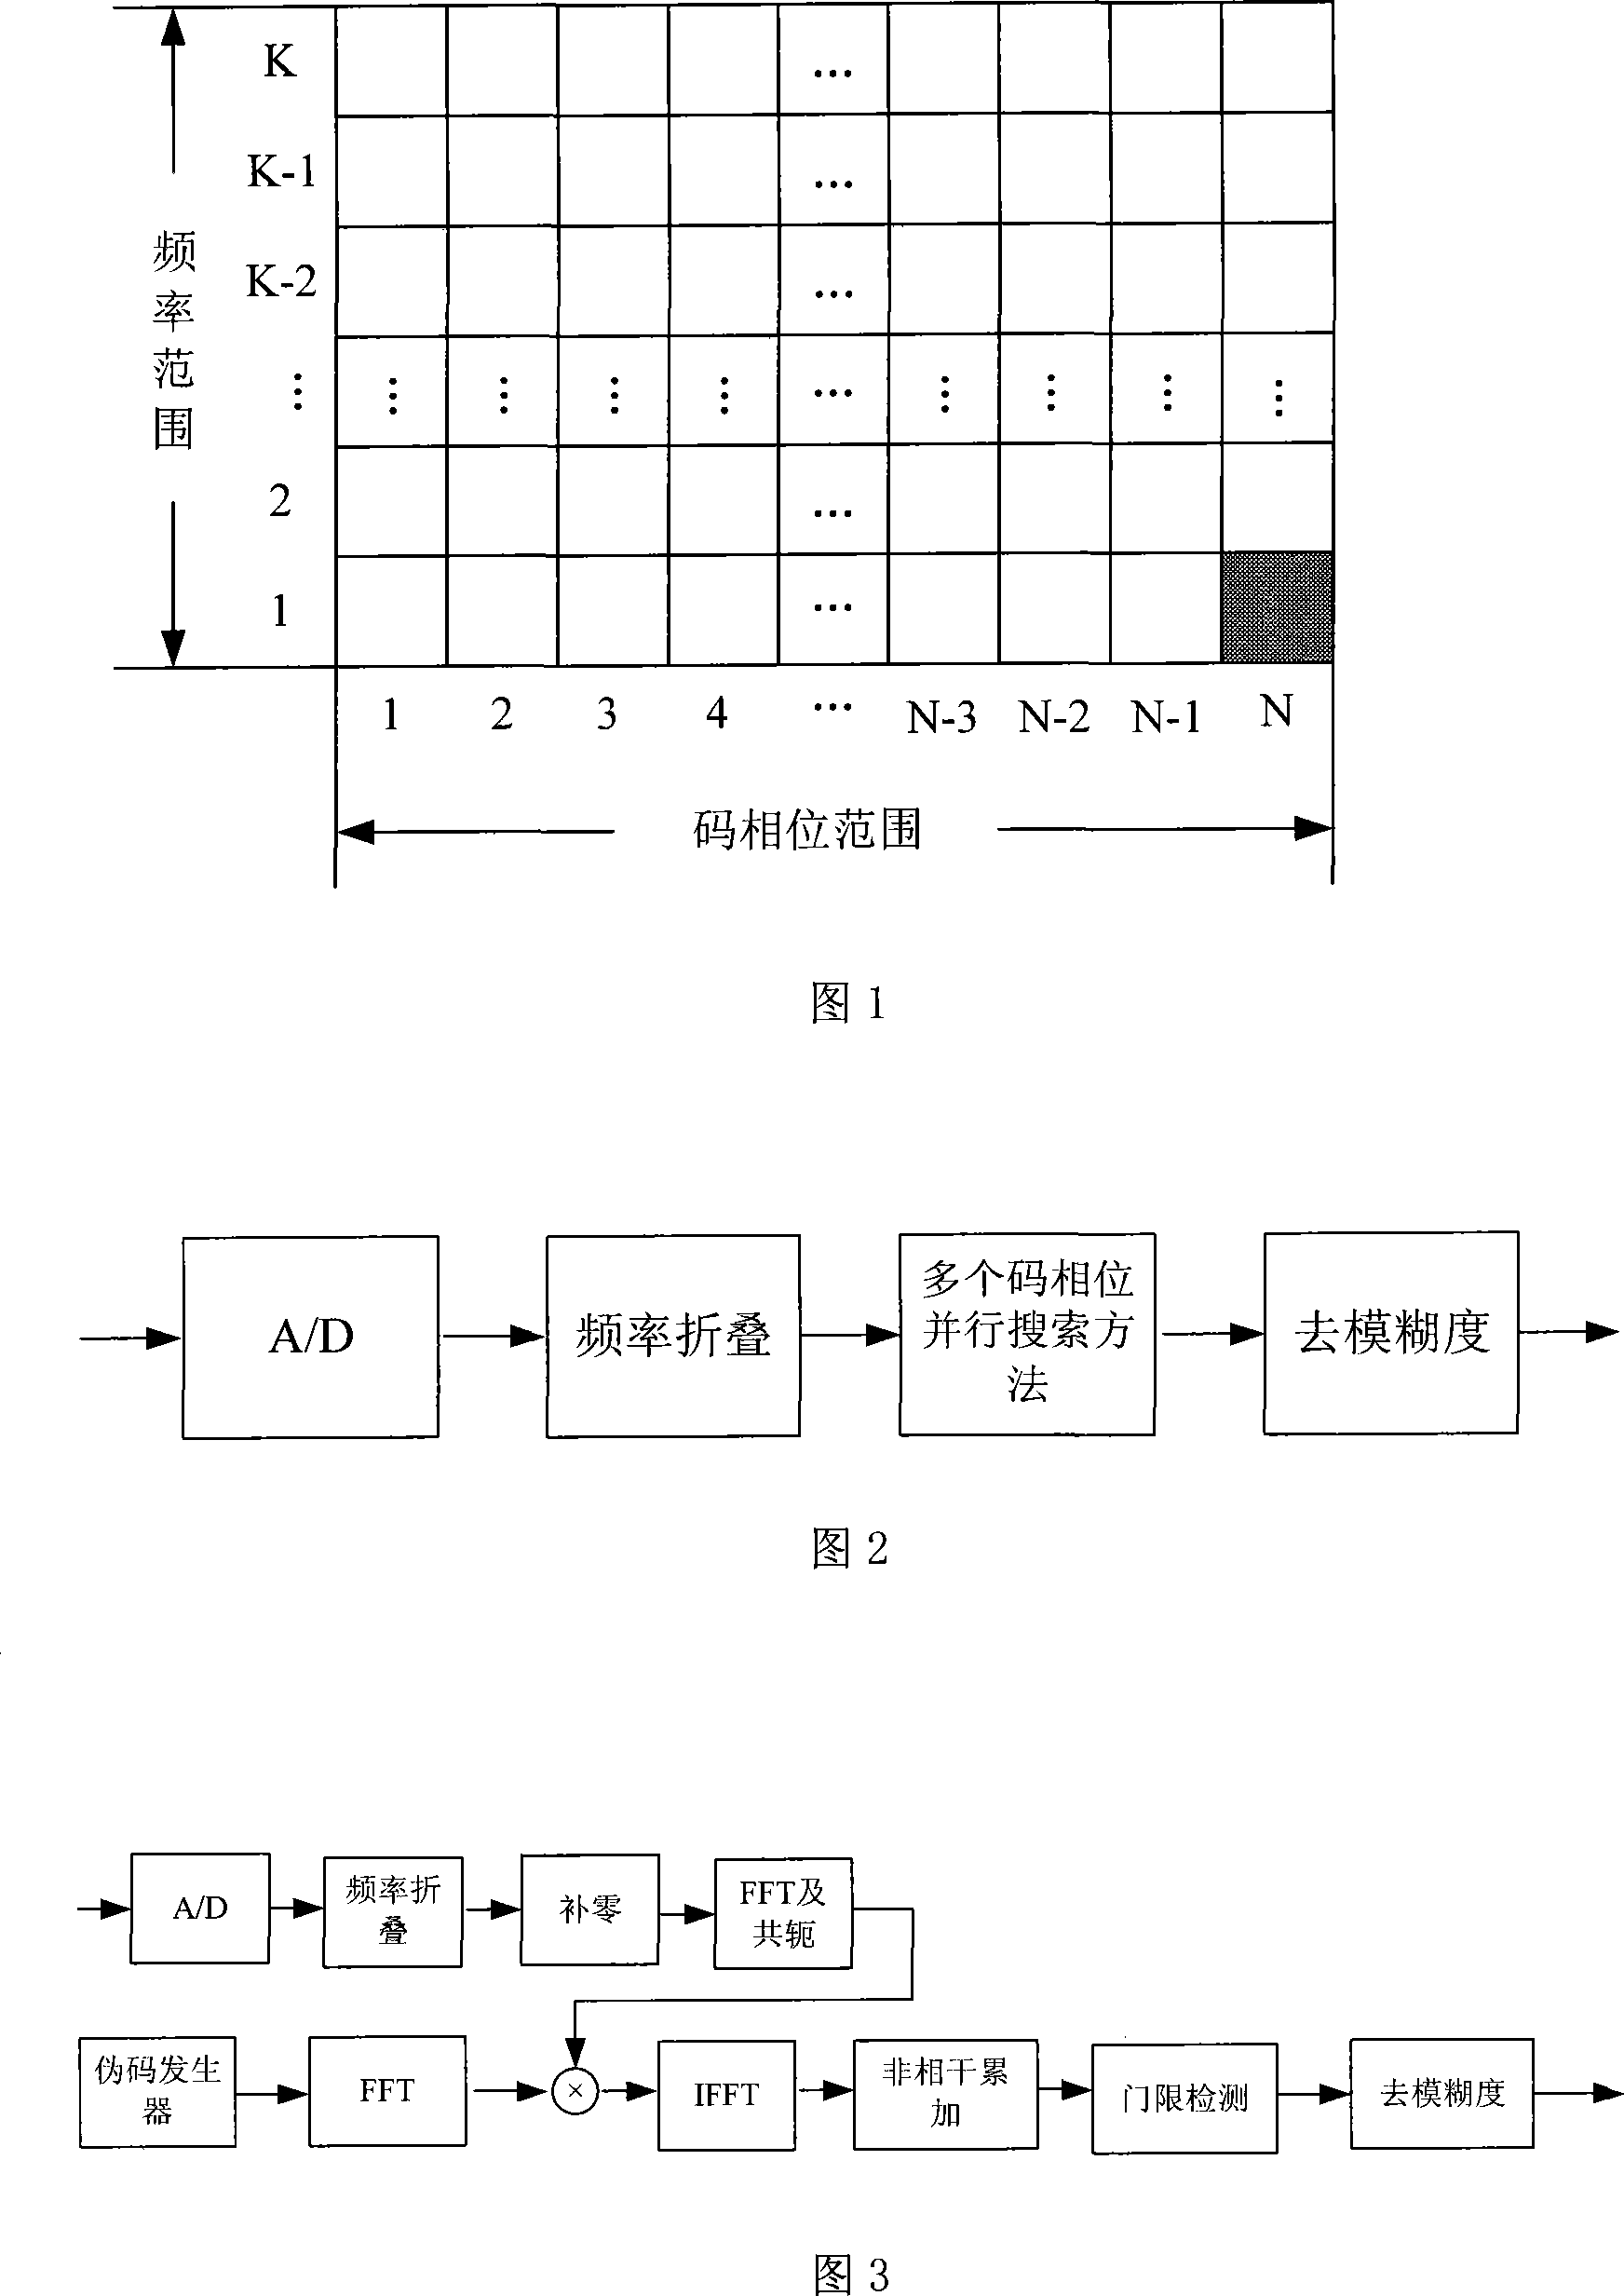 Long-period spreading code frequency folding time frequency parallel searching method